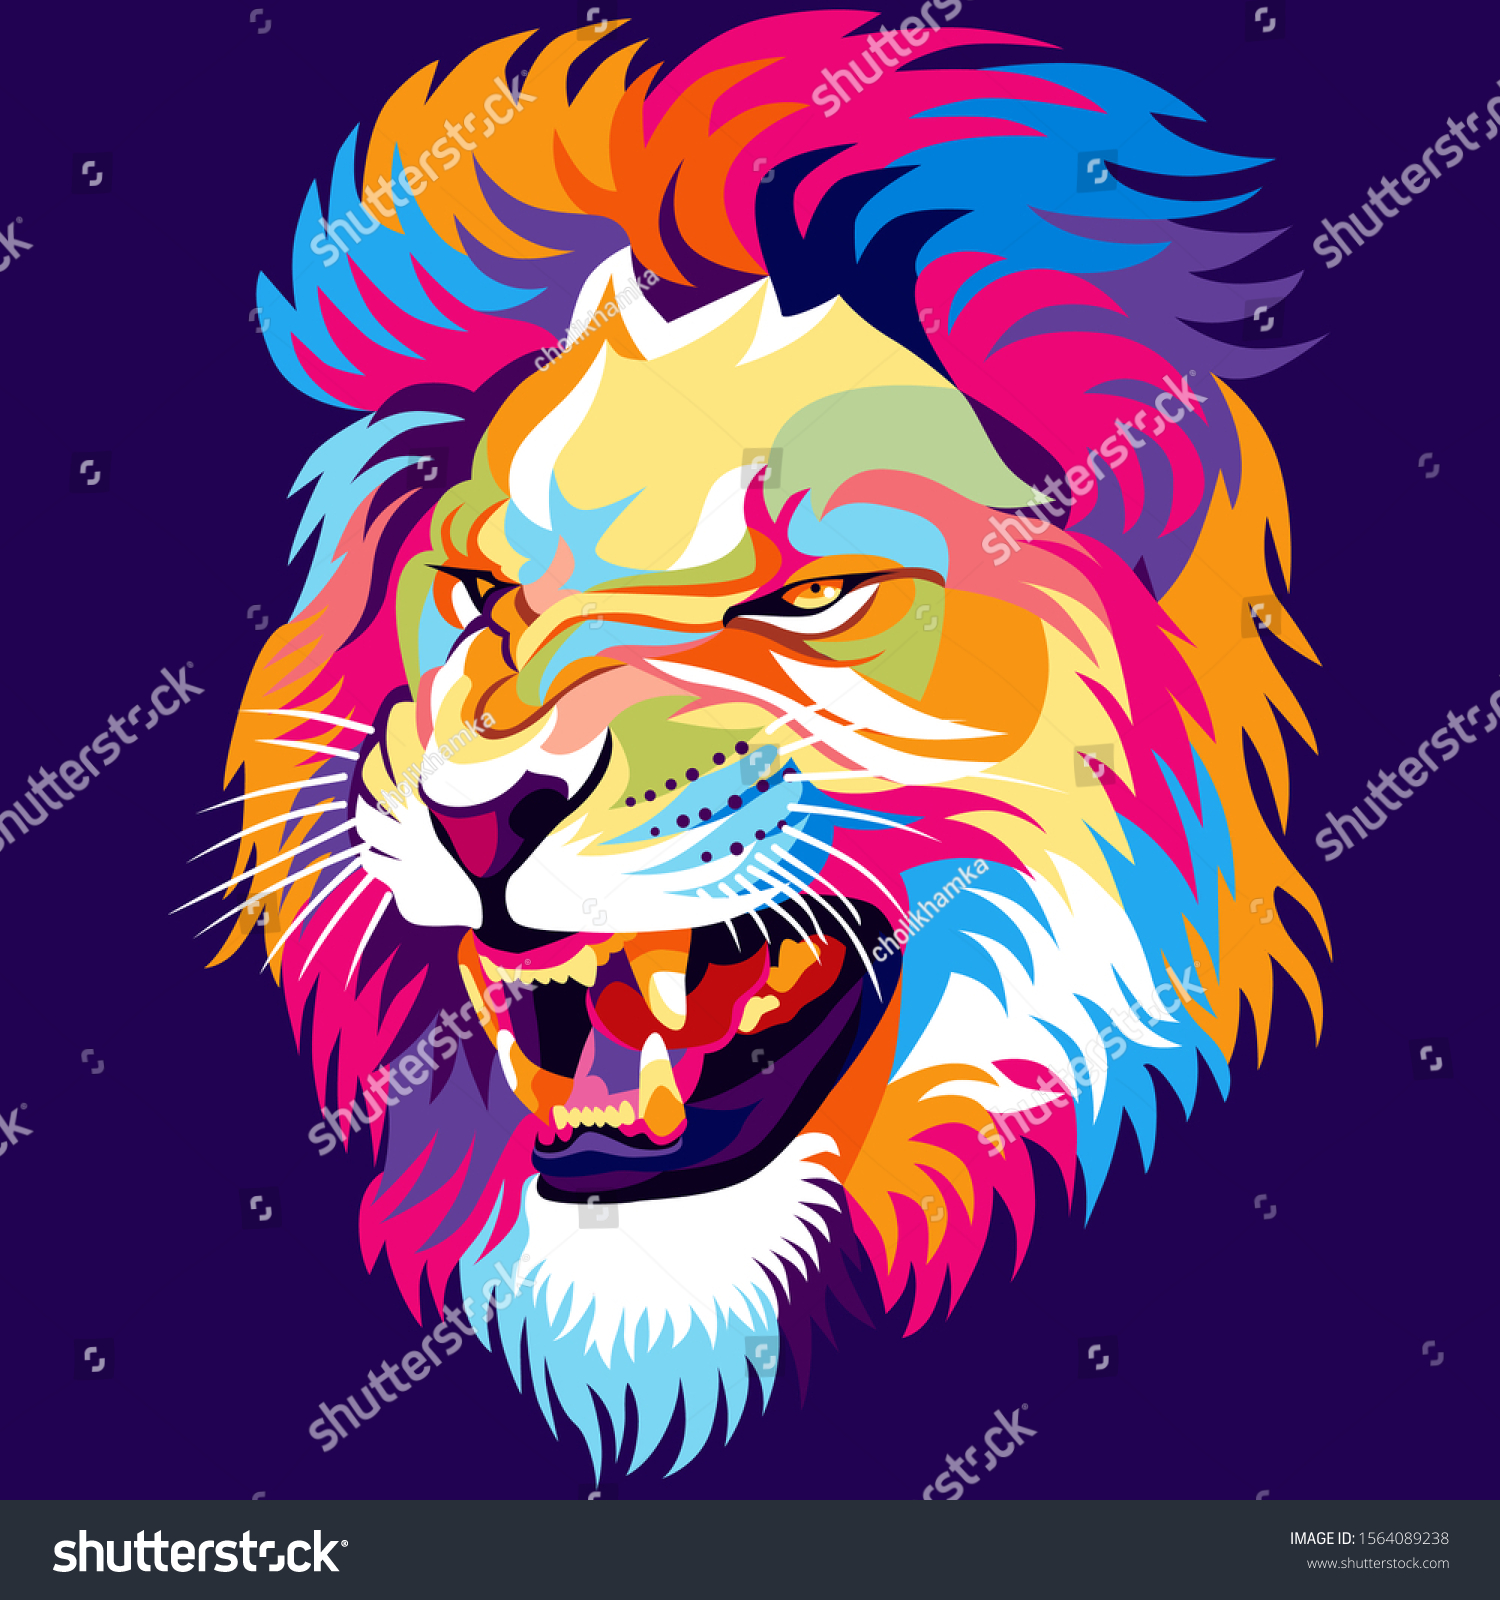 Illustration Colorful Lion Angry Expression Dark Stock Vector (Royalty ...